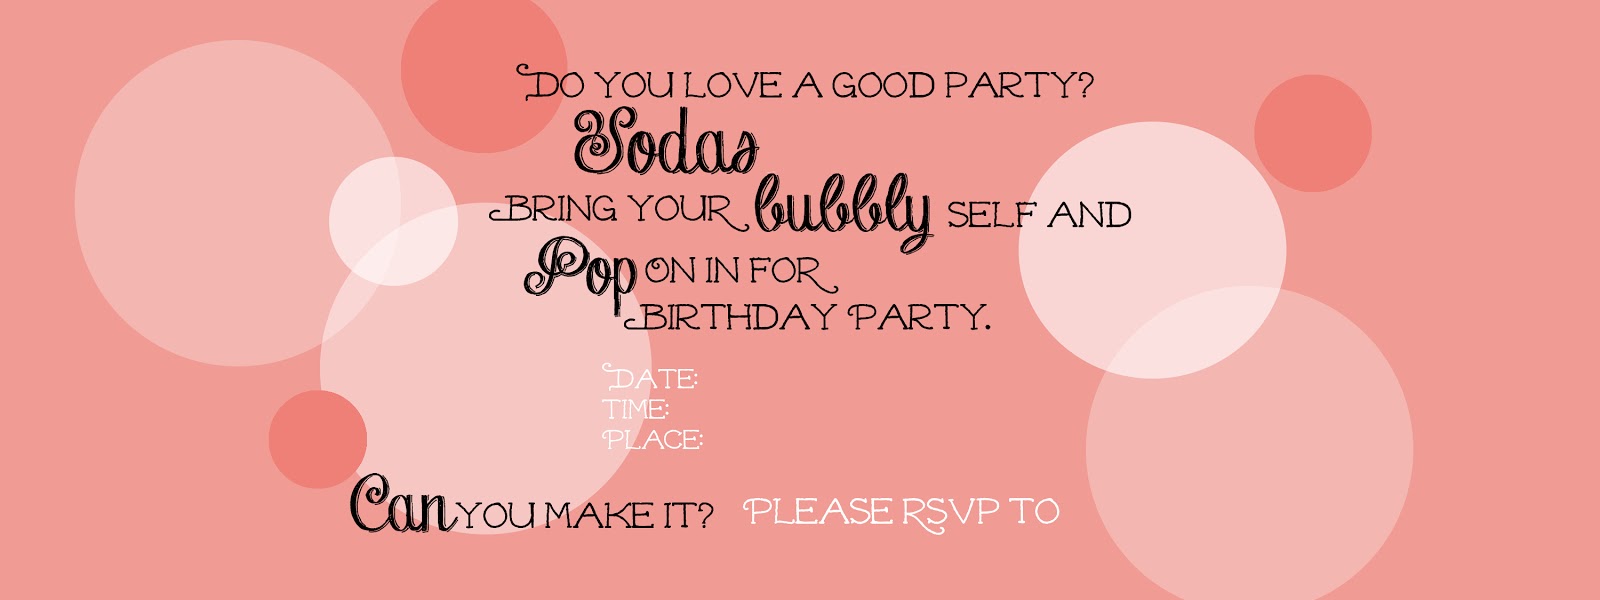 Soda Can and Candy Party Invitations with free printable labels at /